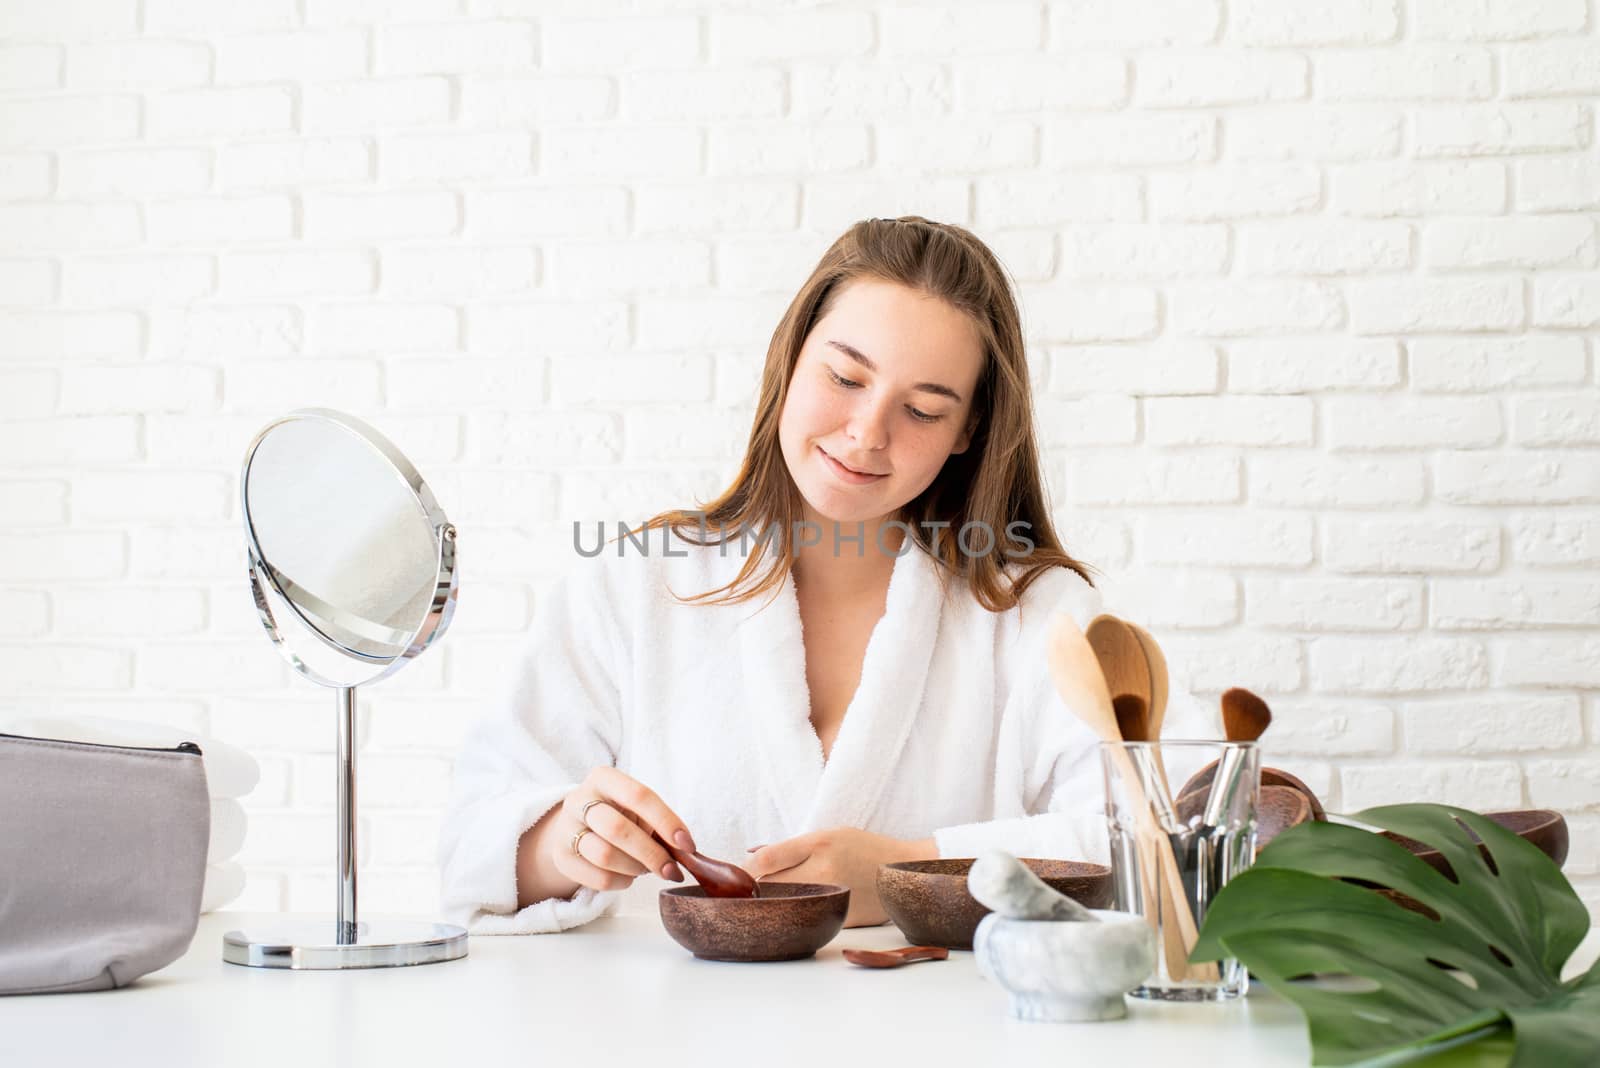 Spa and wellness. Natural cosmetics. Self care. Young caucasian woman wearing bathrobes doing spa procedures using natural cosmetics